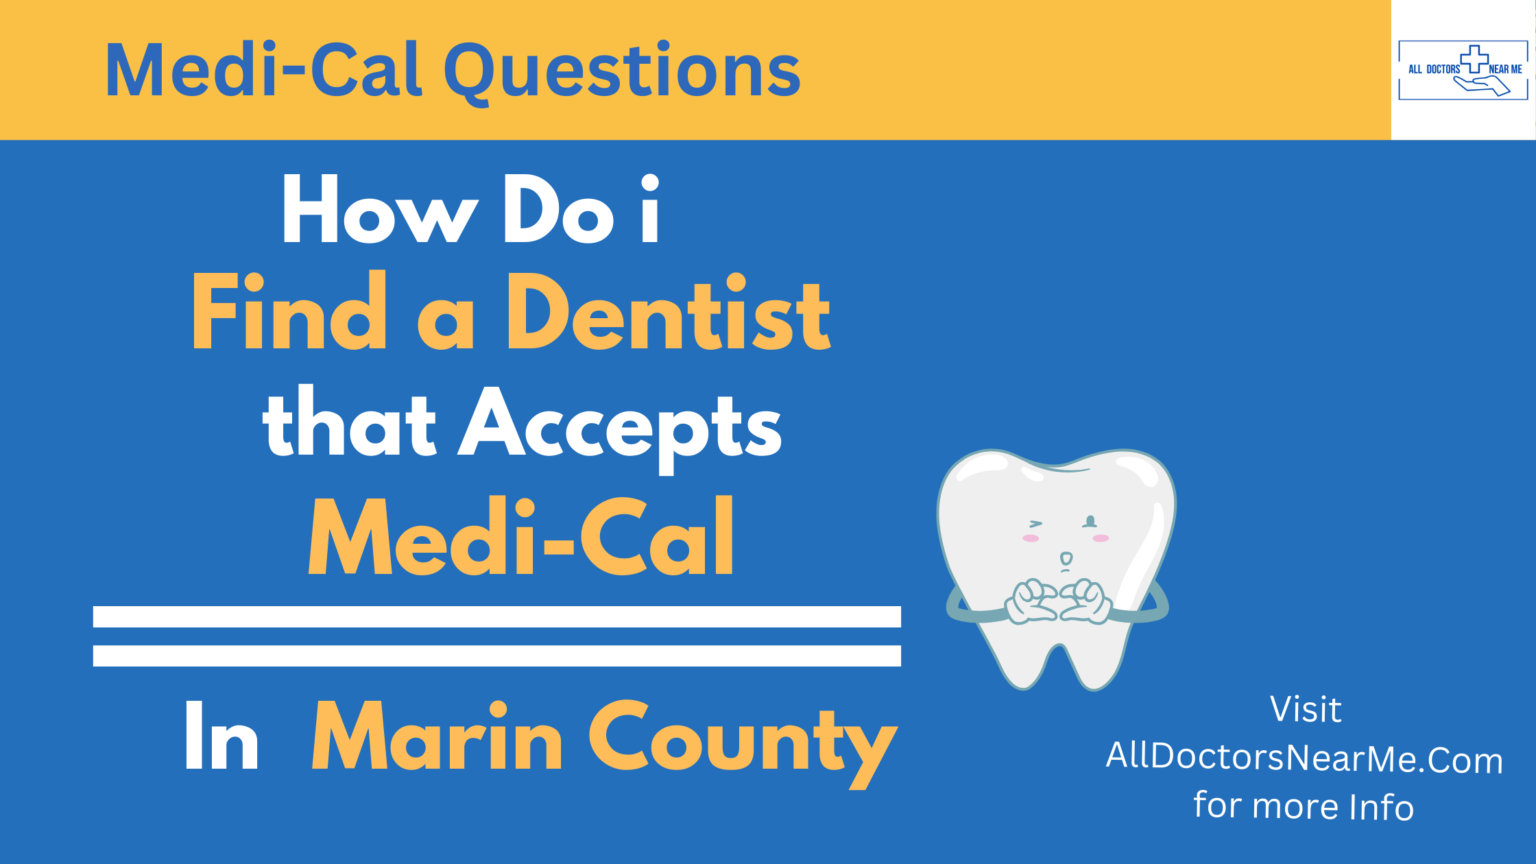 Dentists that Accept MediCal in Marin County All Doctors Near Me